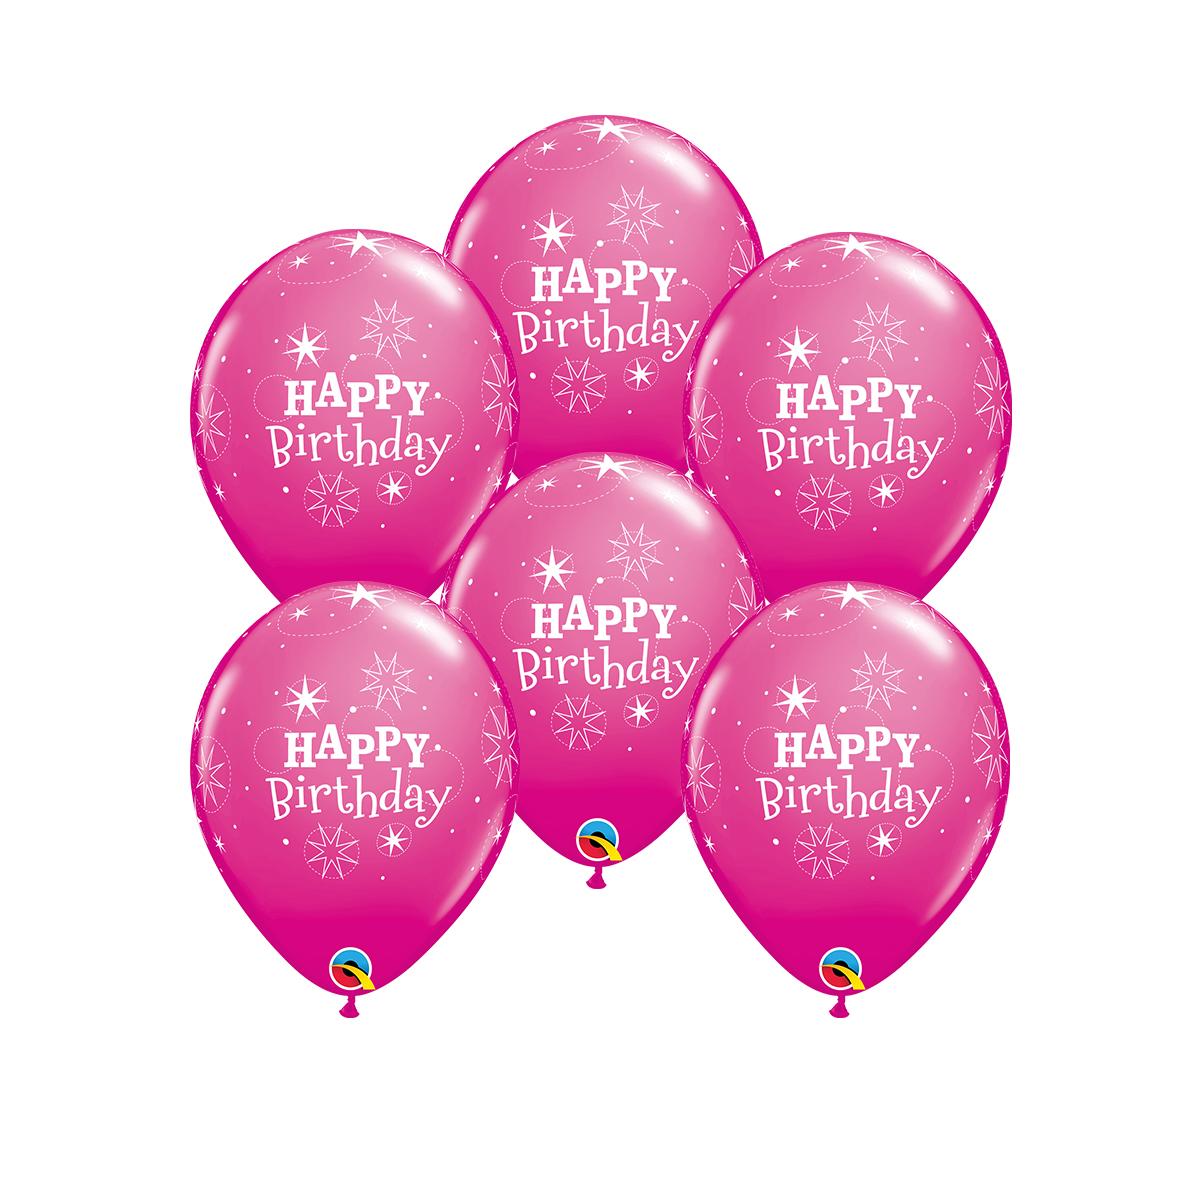 Image Of A Packet Of 6 Pink Happy Birthday Balloons